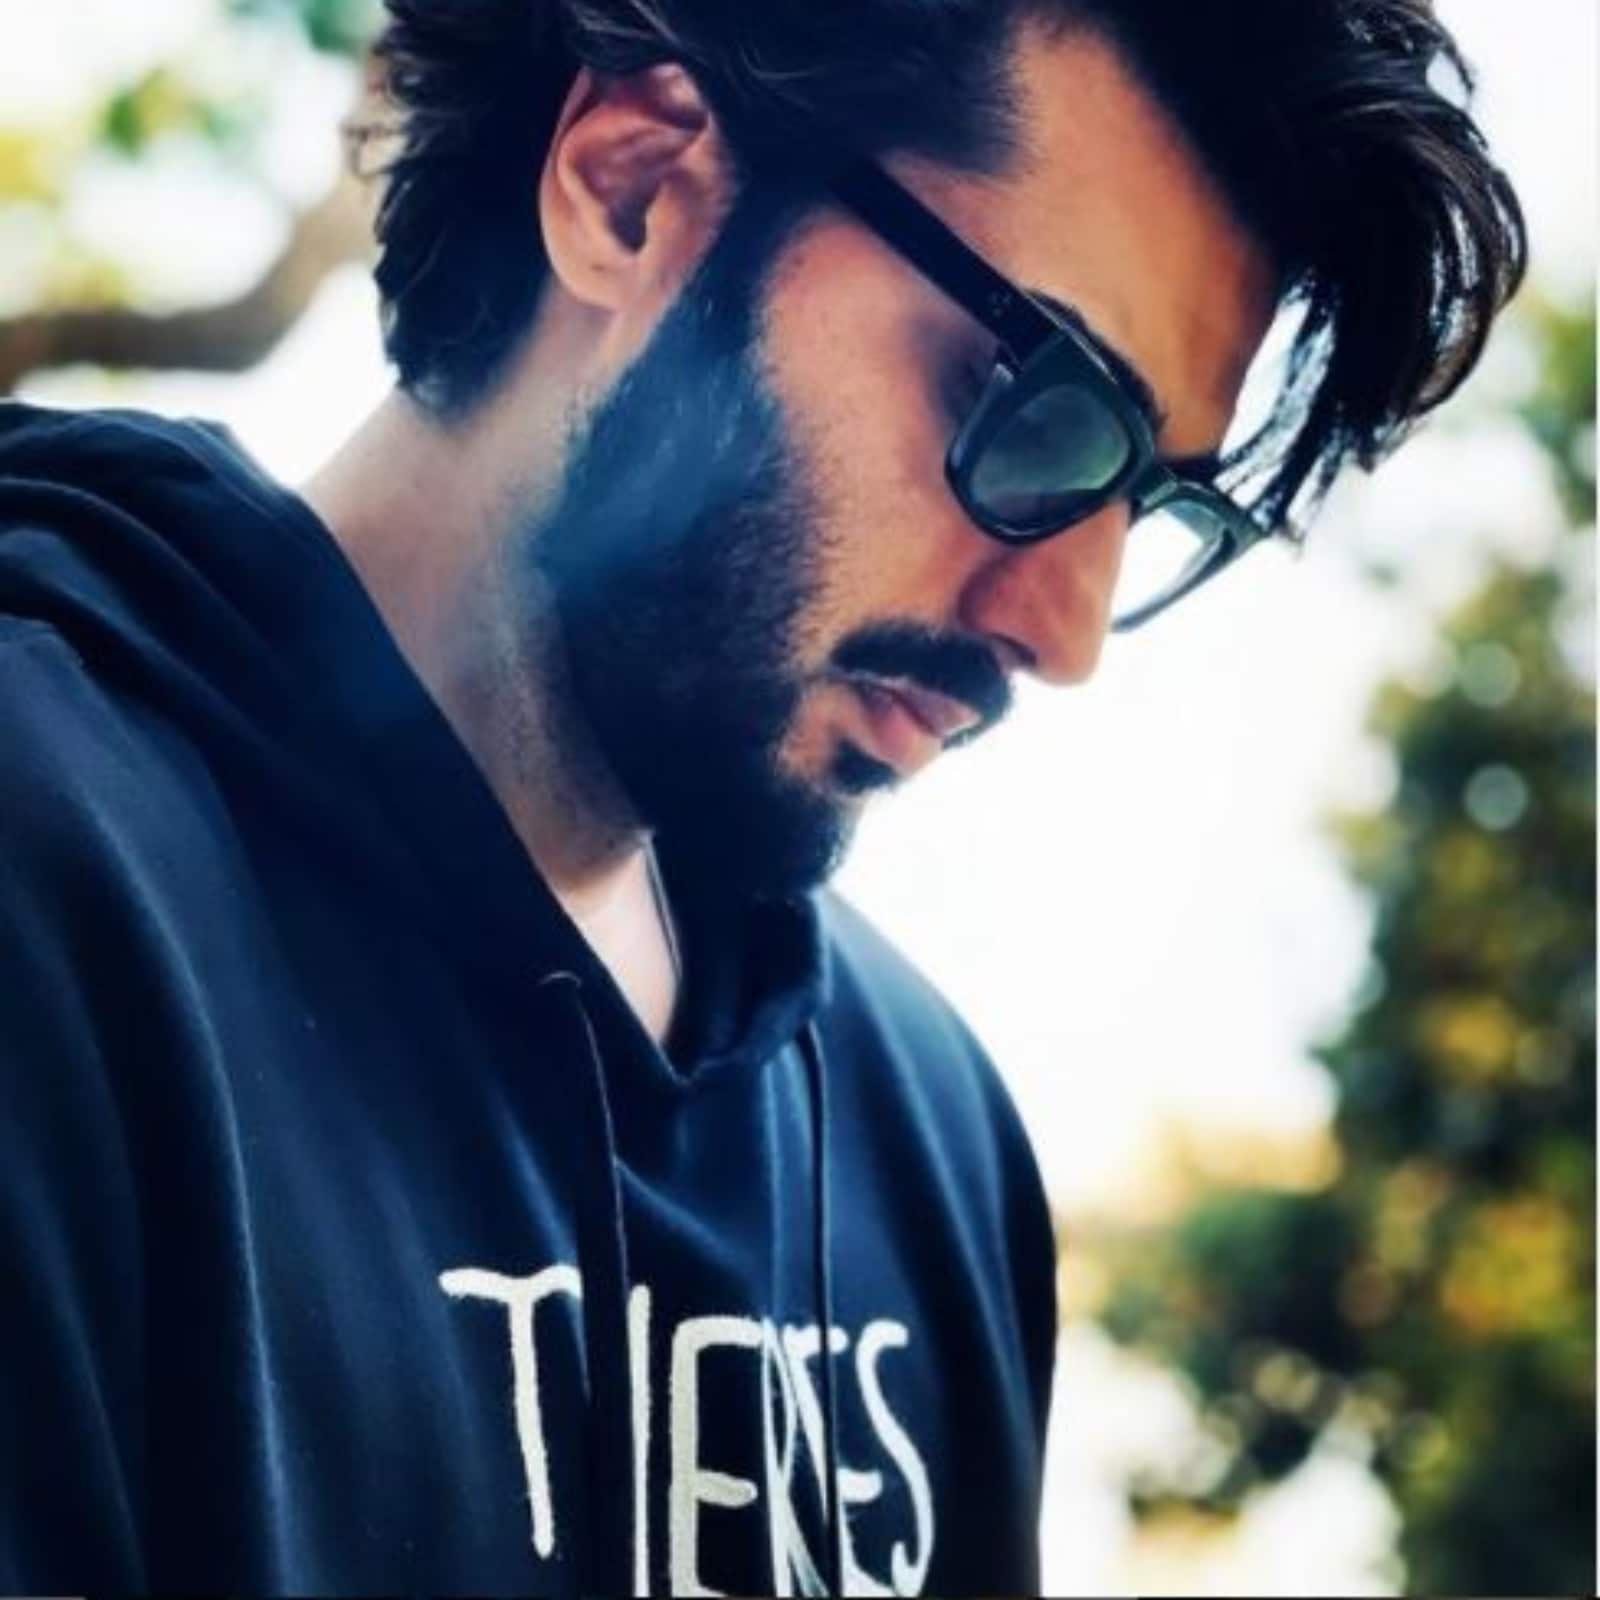 Arjun kapoor gets a pliment from girlfriend malaika arora for his latest instagram pic handsome much